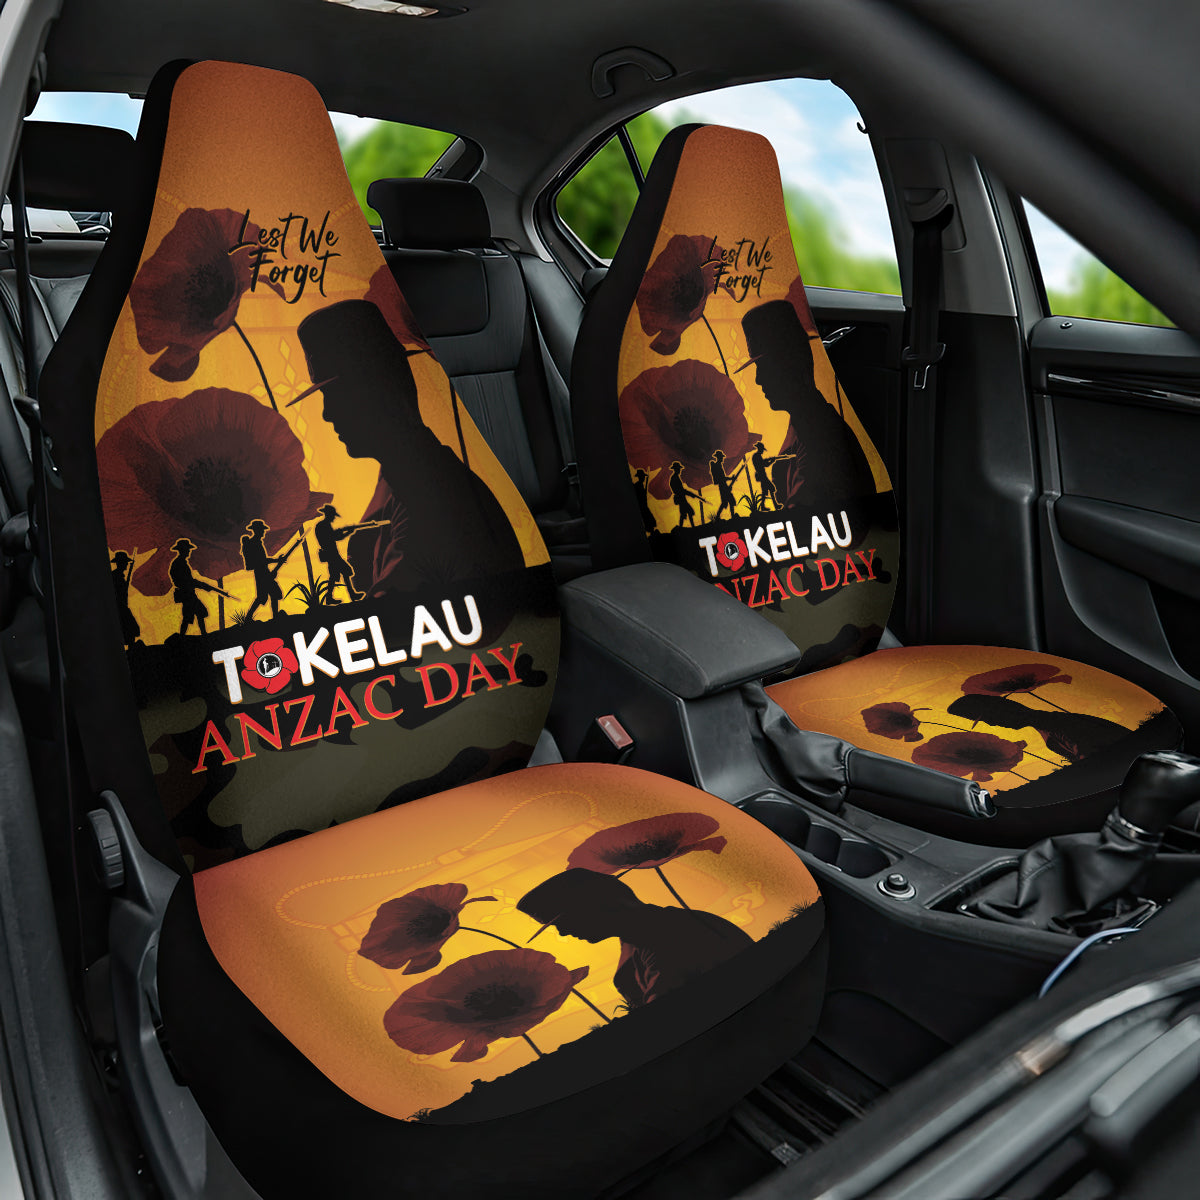 Tokelau ANZAC Day Car Seat Cover Camouflage With Poppies Lest We Forget LT14 One Size Yellow - Polynesian Pride